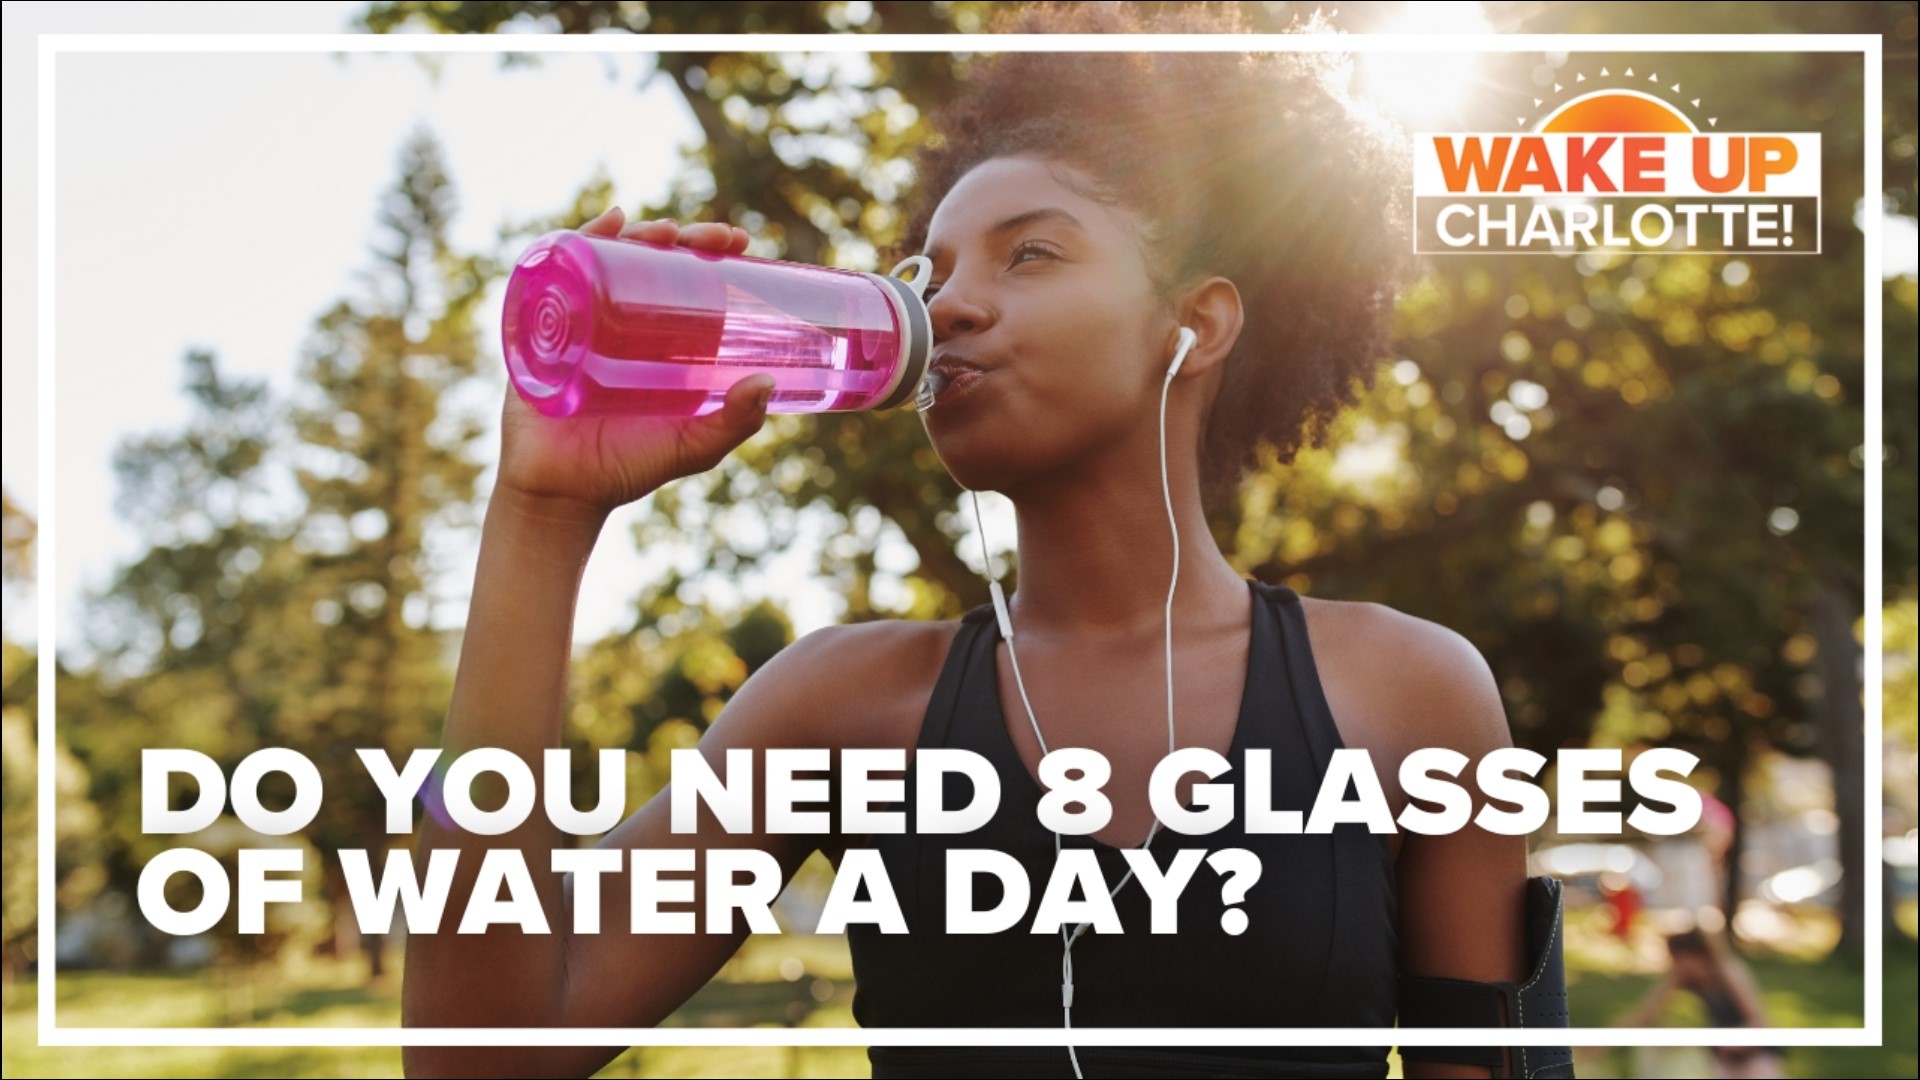 Most of us have heard the saying you should drink eight glasses of water a day. With this heat, is it enough water?